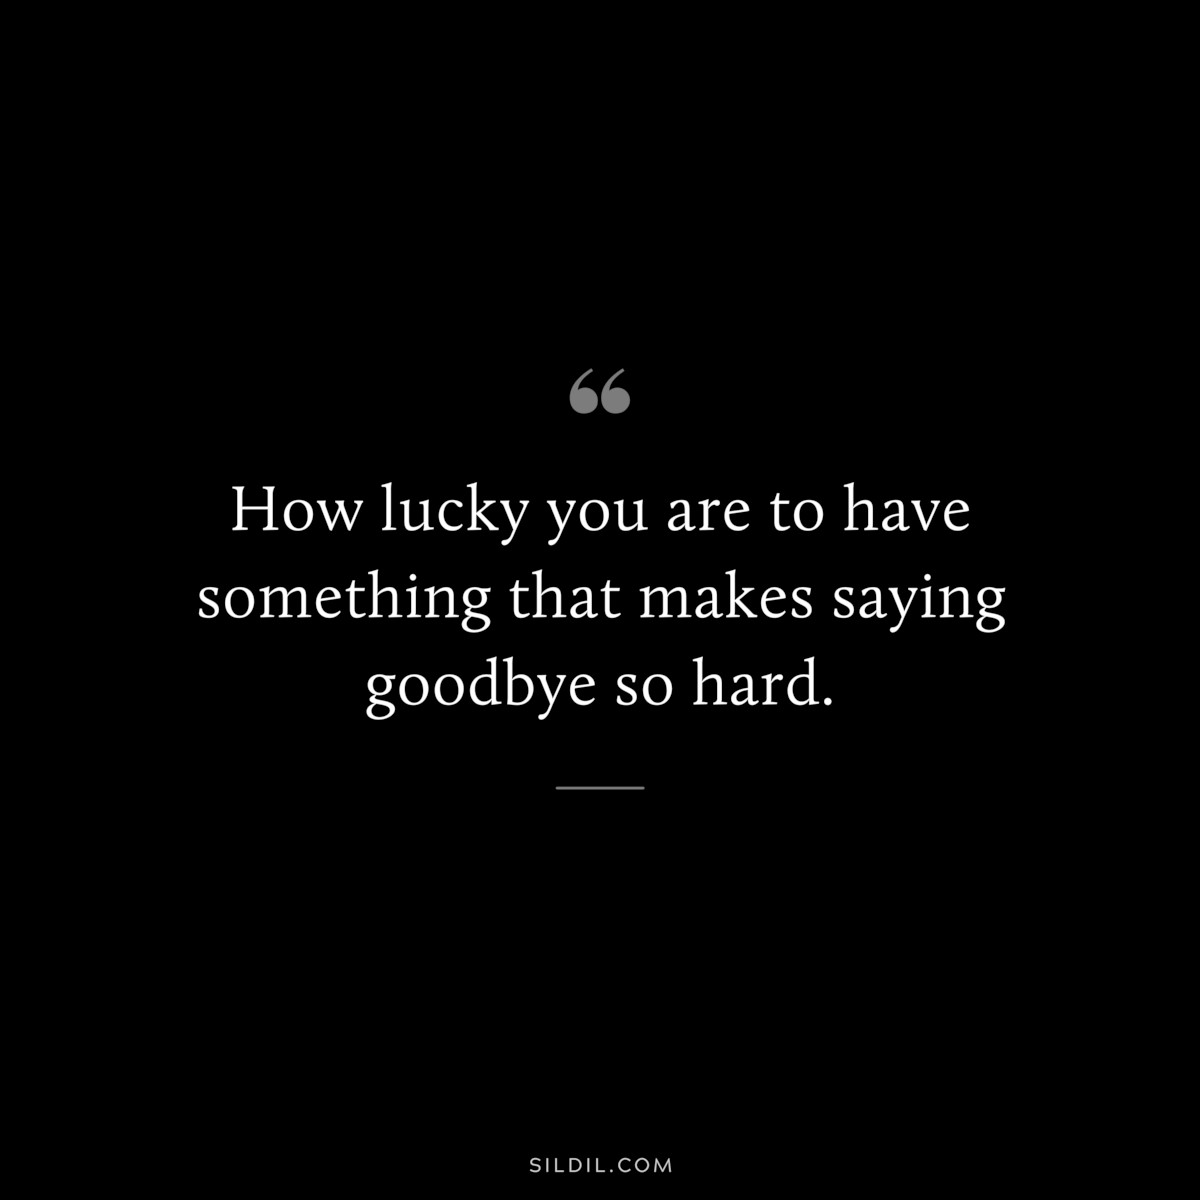 How lucky you are to have something that makes saying goodbye so hard.